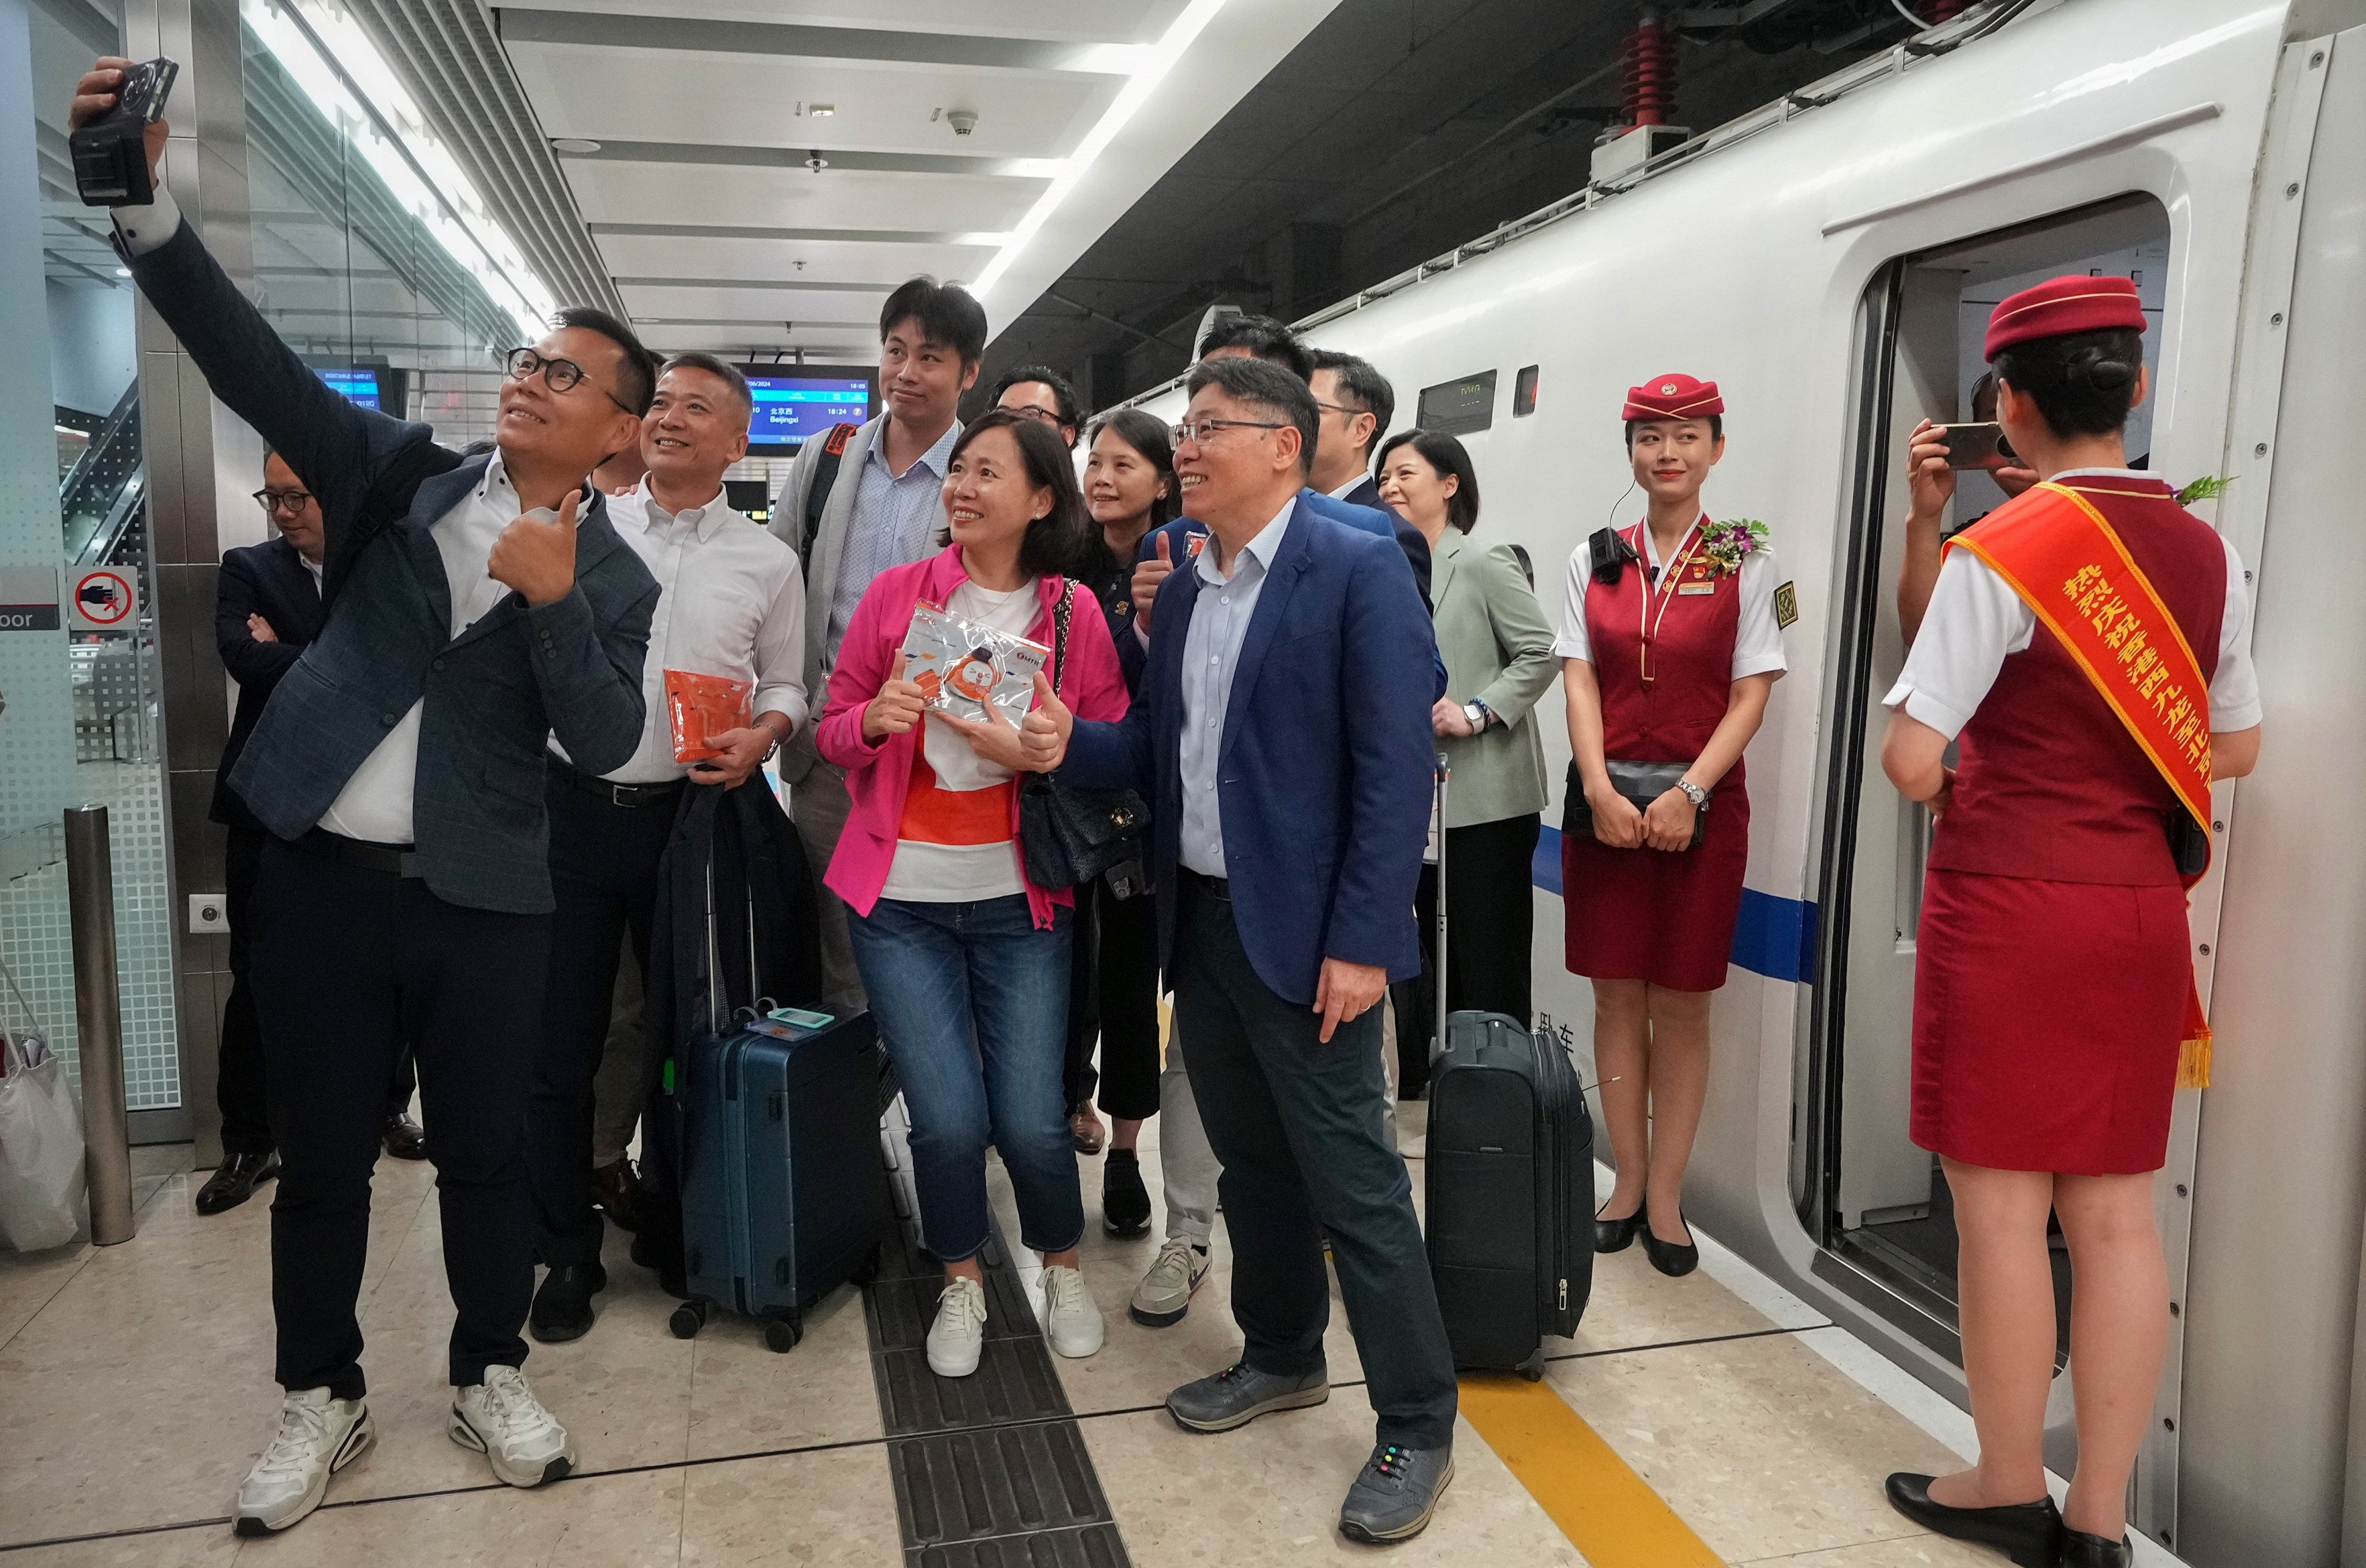 The service to Beijing is expected to take about 12½ hours, while the train to Shanghai has a travel time of around 11 hours. Photo: Elson Li